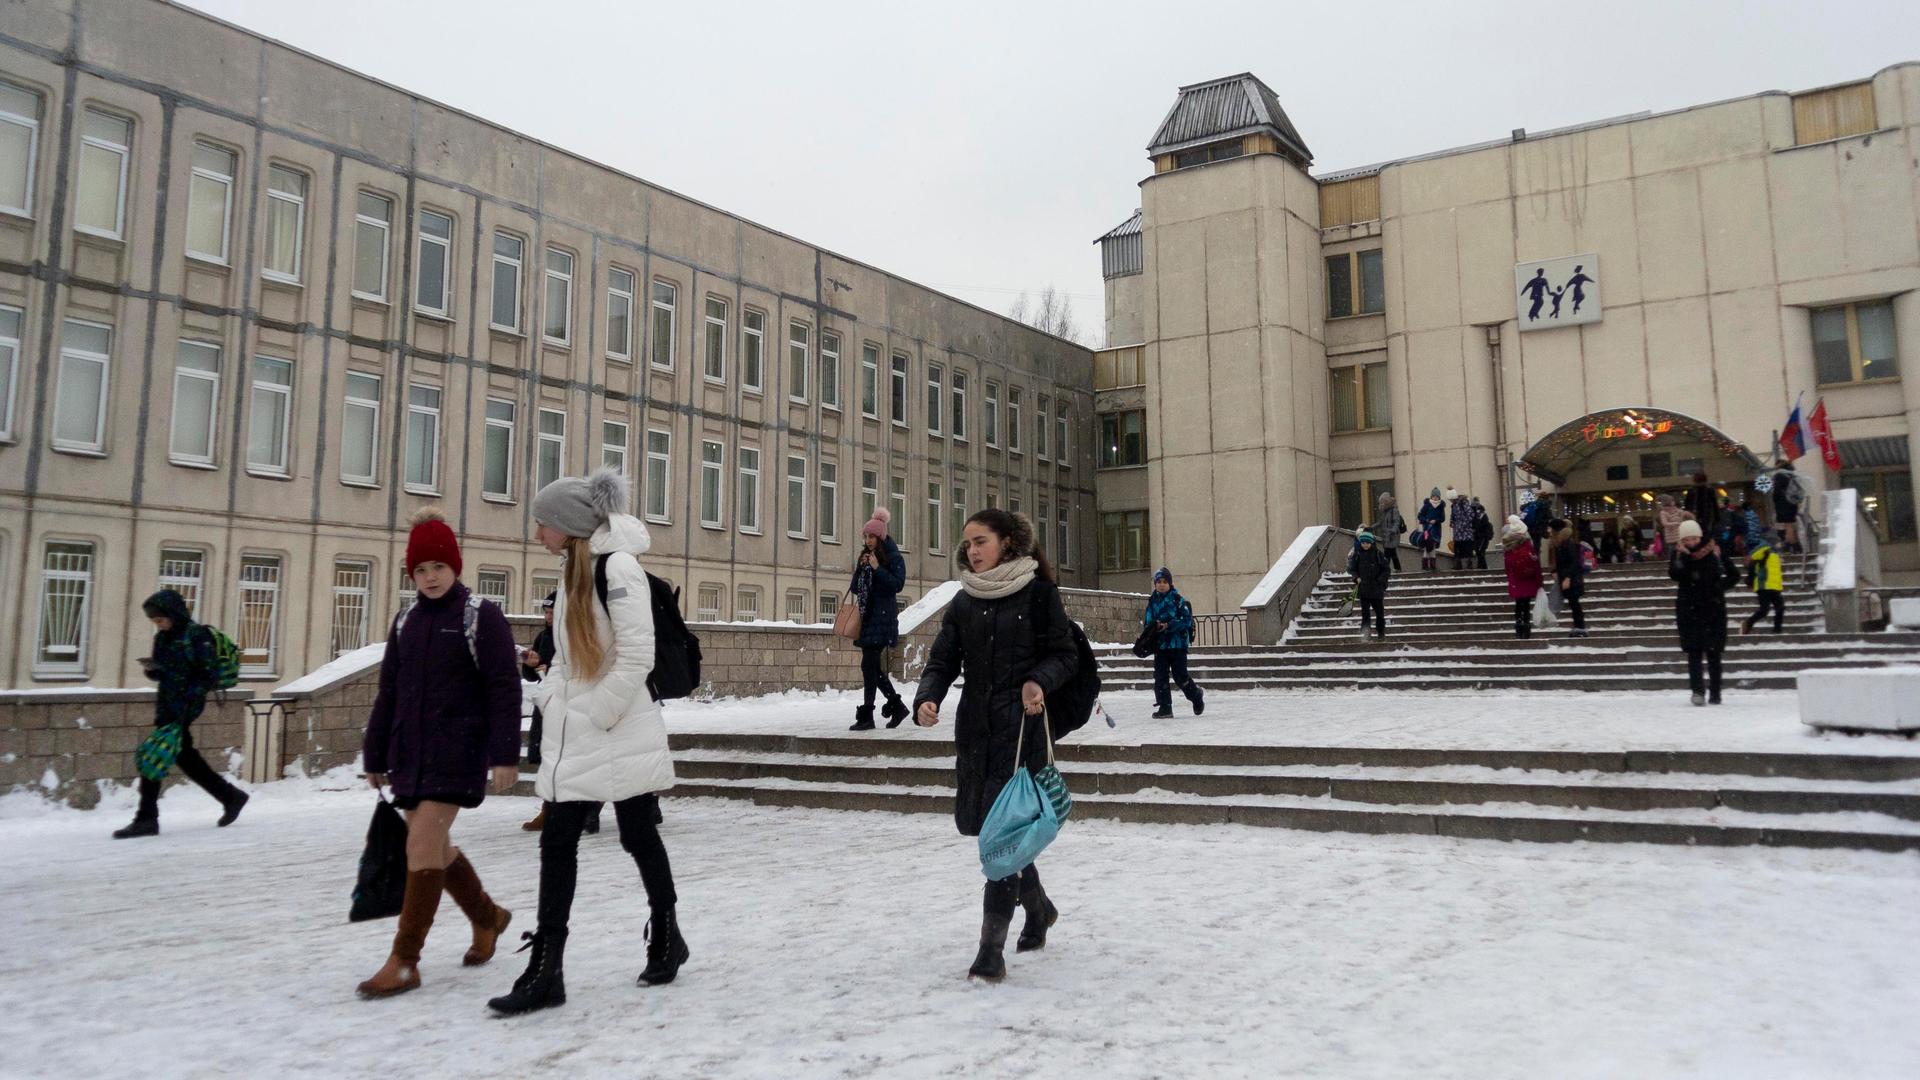 In this photo taken on Thursday, Dec. 20, 2018, students come out of a school building in St. Petersburg, Russia.